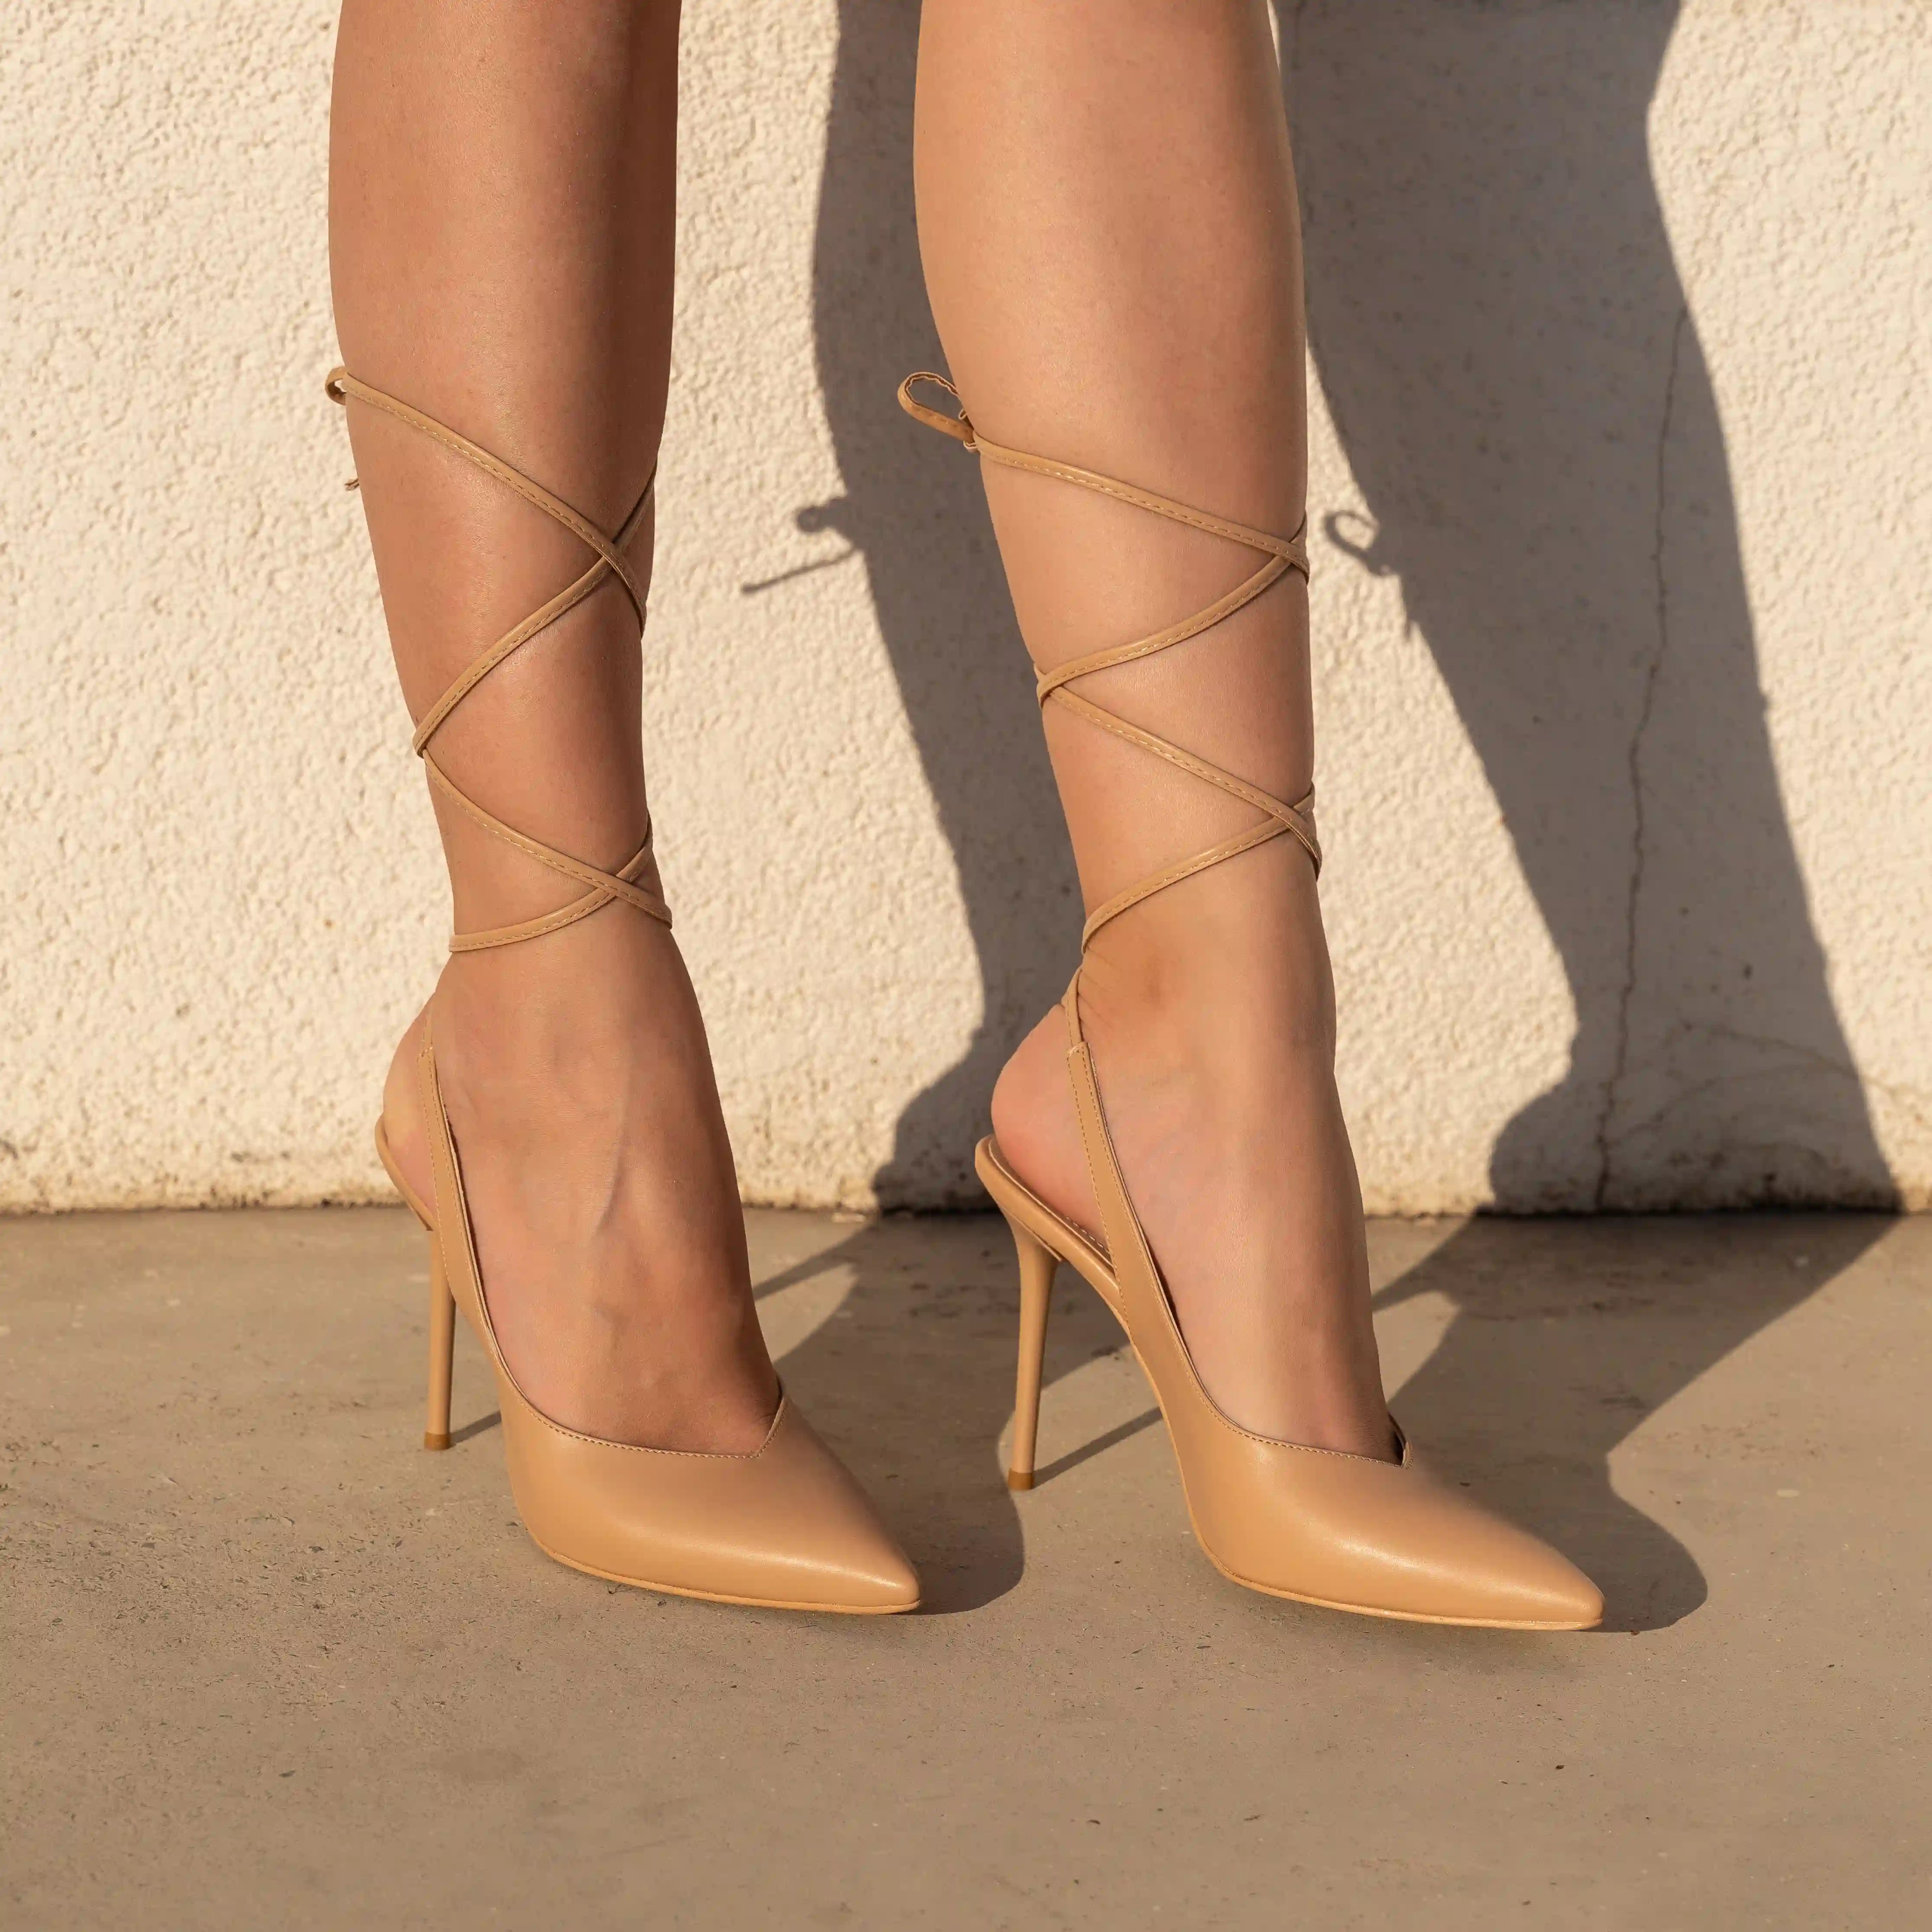 Lace-up Thin High-Heeled Pumps - Neutral